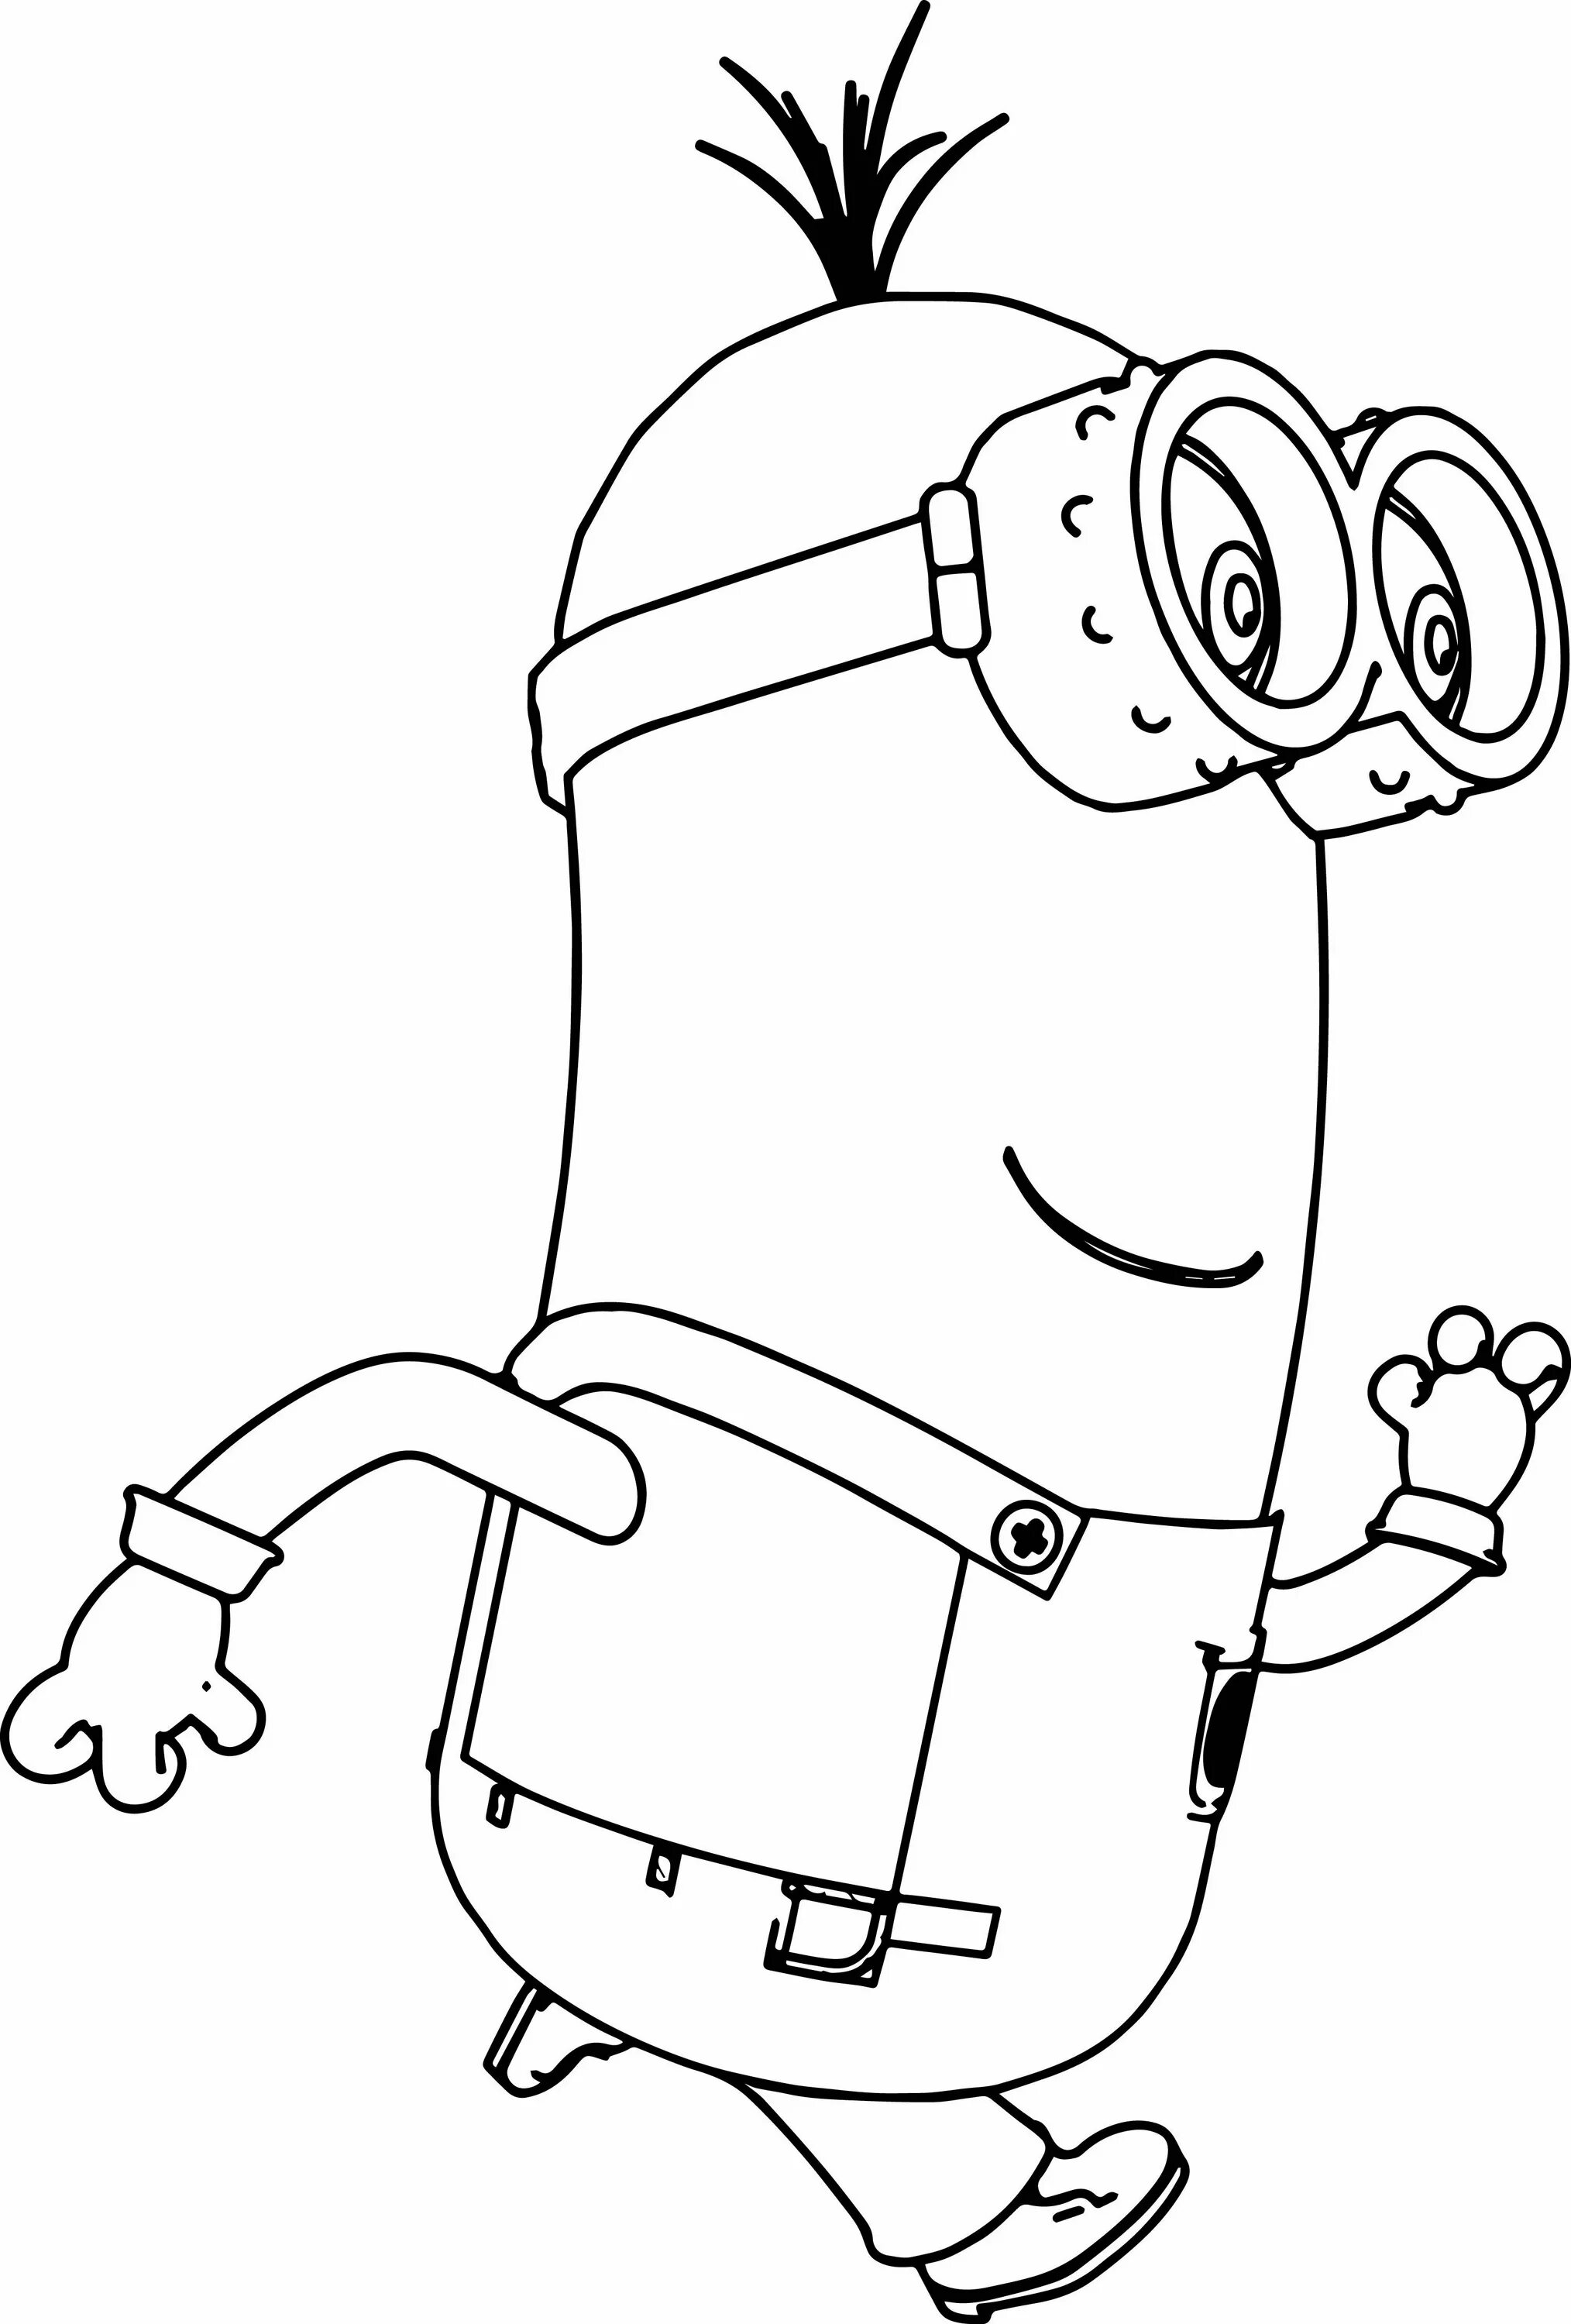 Colorful kevin the minion coloring page